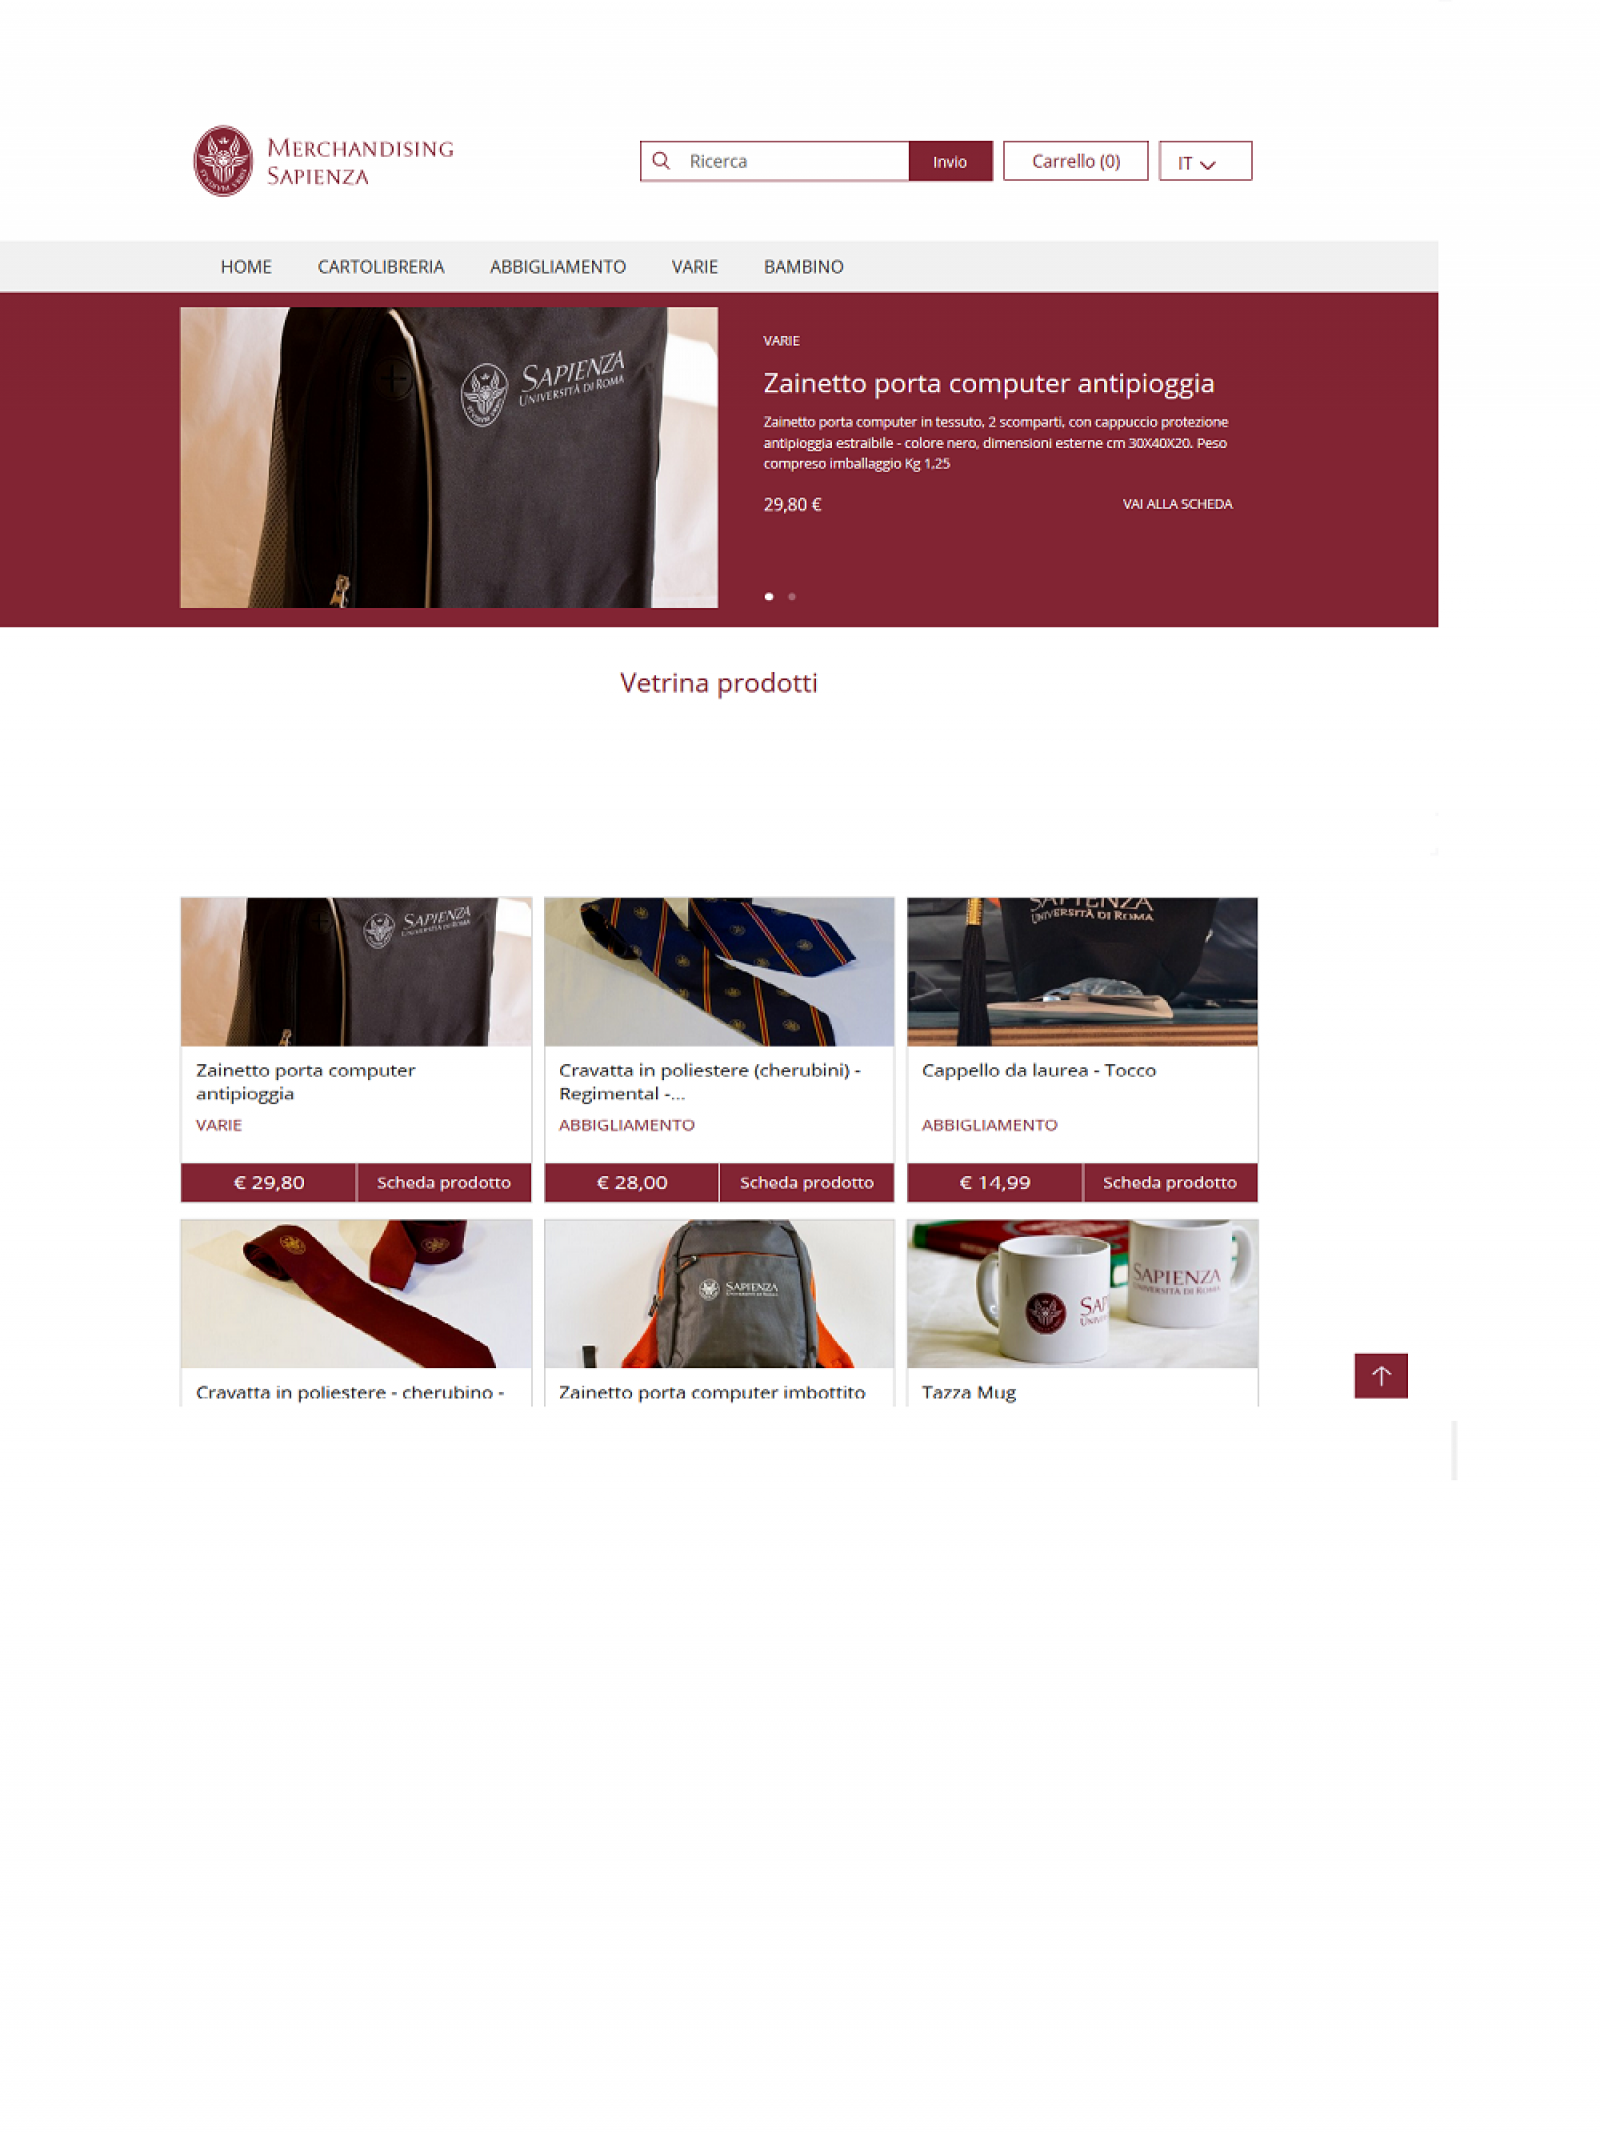 The eCommerce site is ready - Immagine